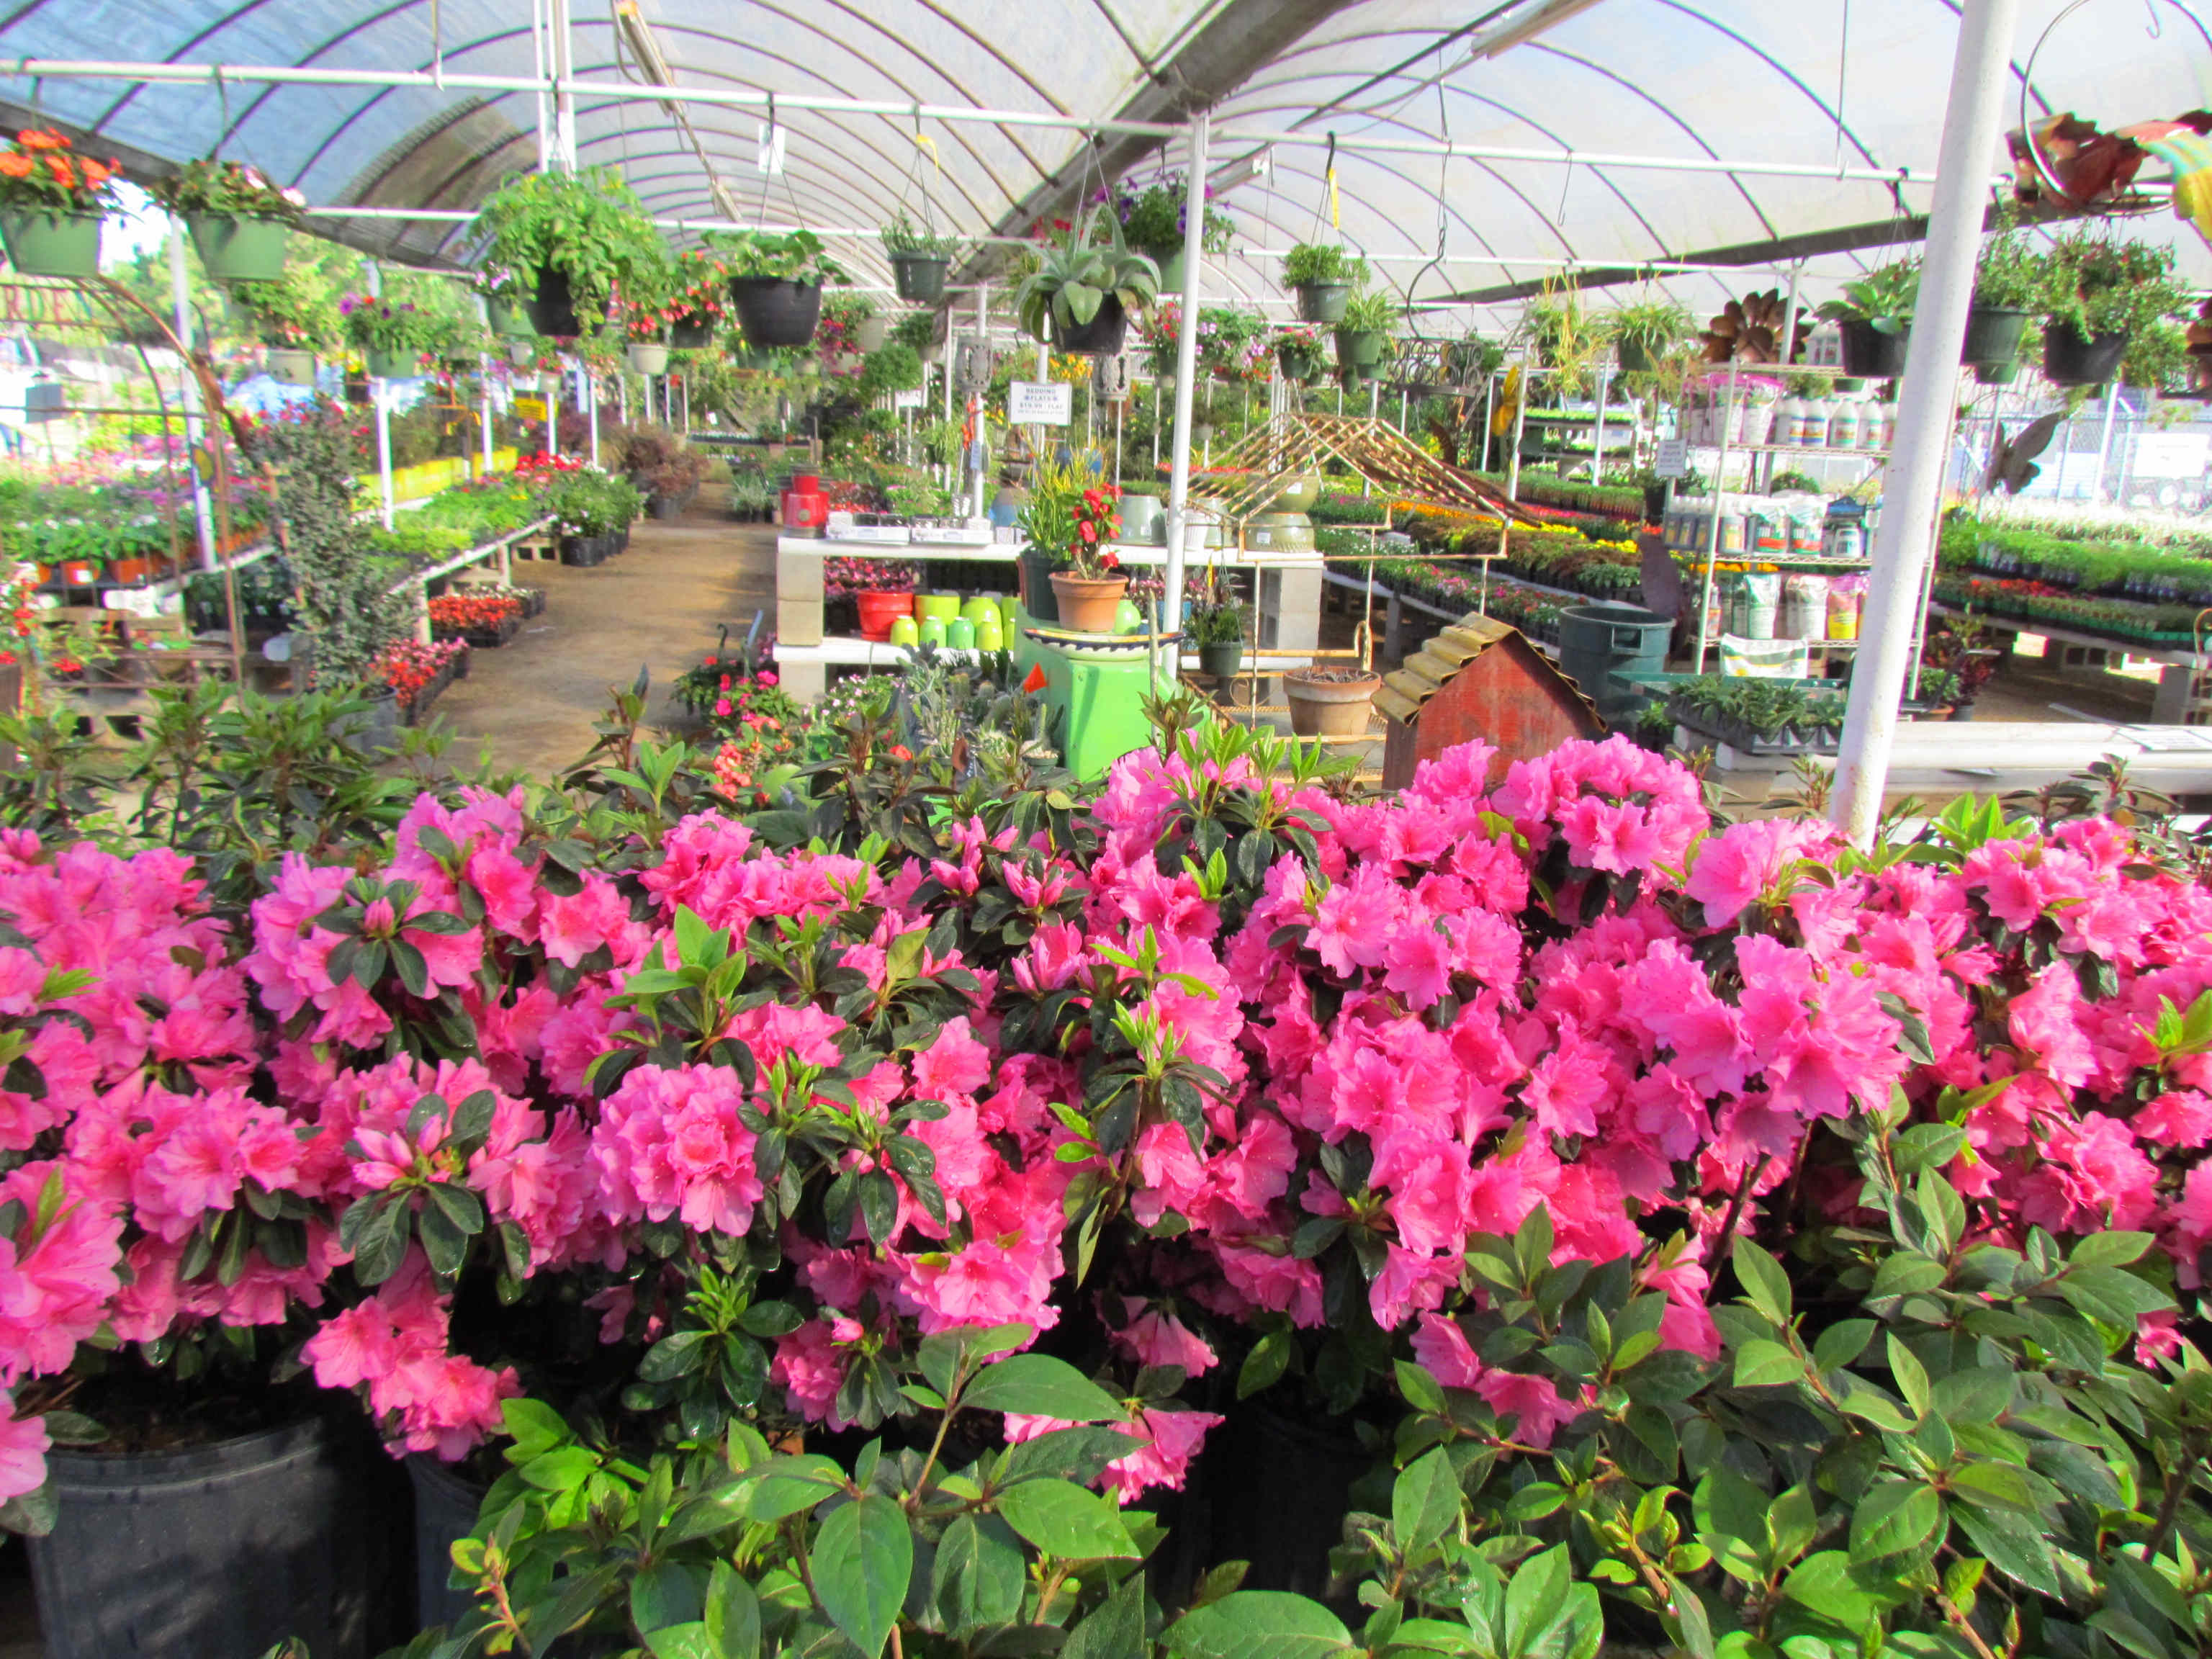 Large variety of hanging baskets, bushes, shrubs, trees, flowers, vines, vegetables and more at Madison Gardens Nursery, Spring, TX.